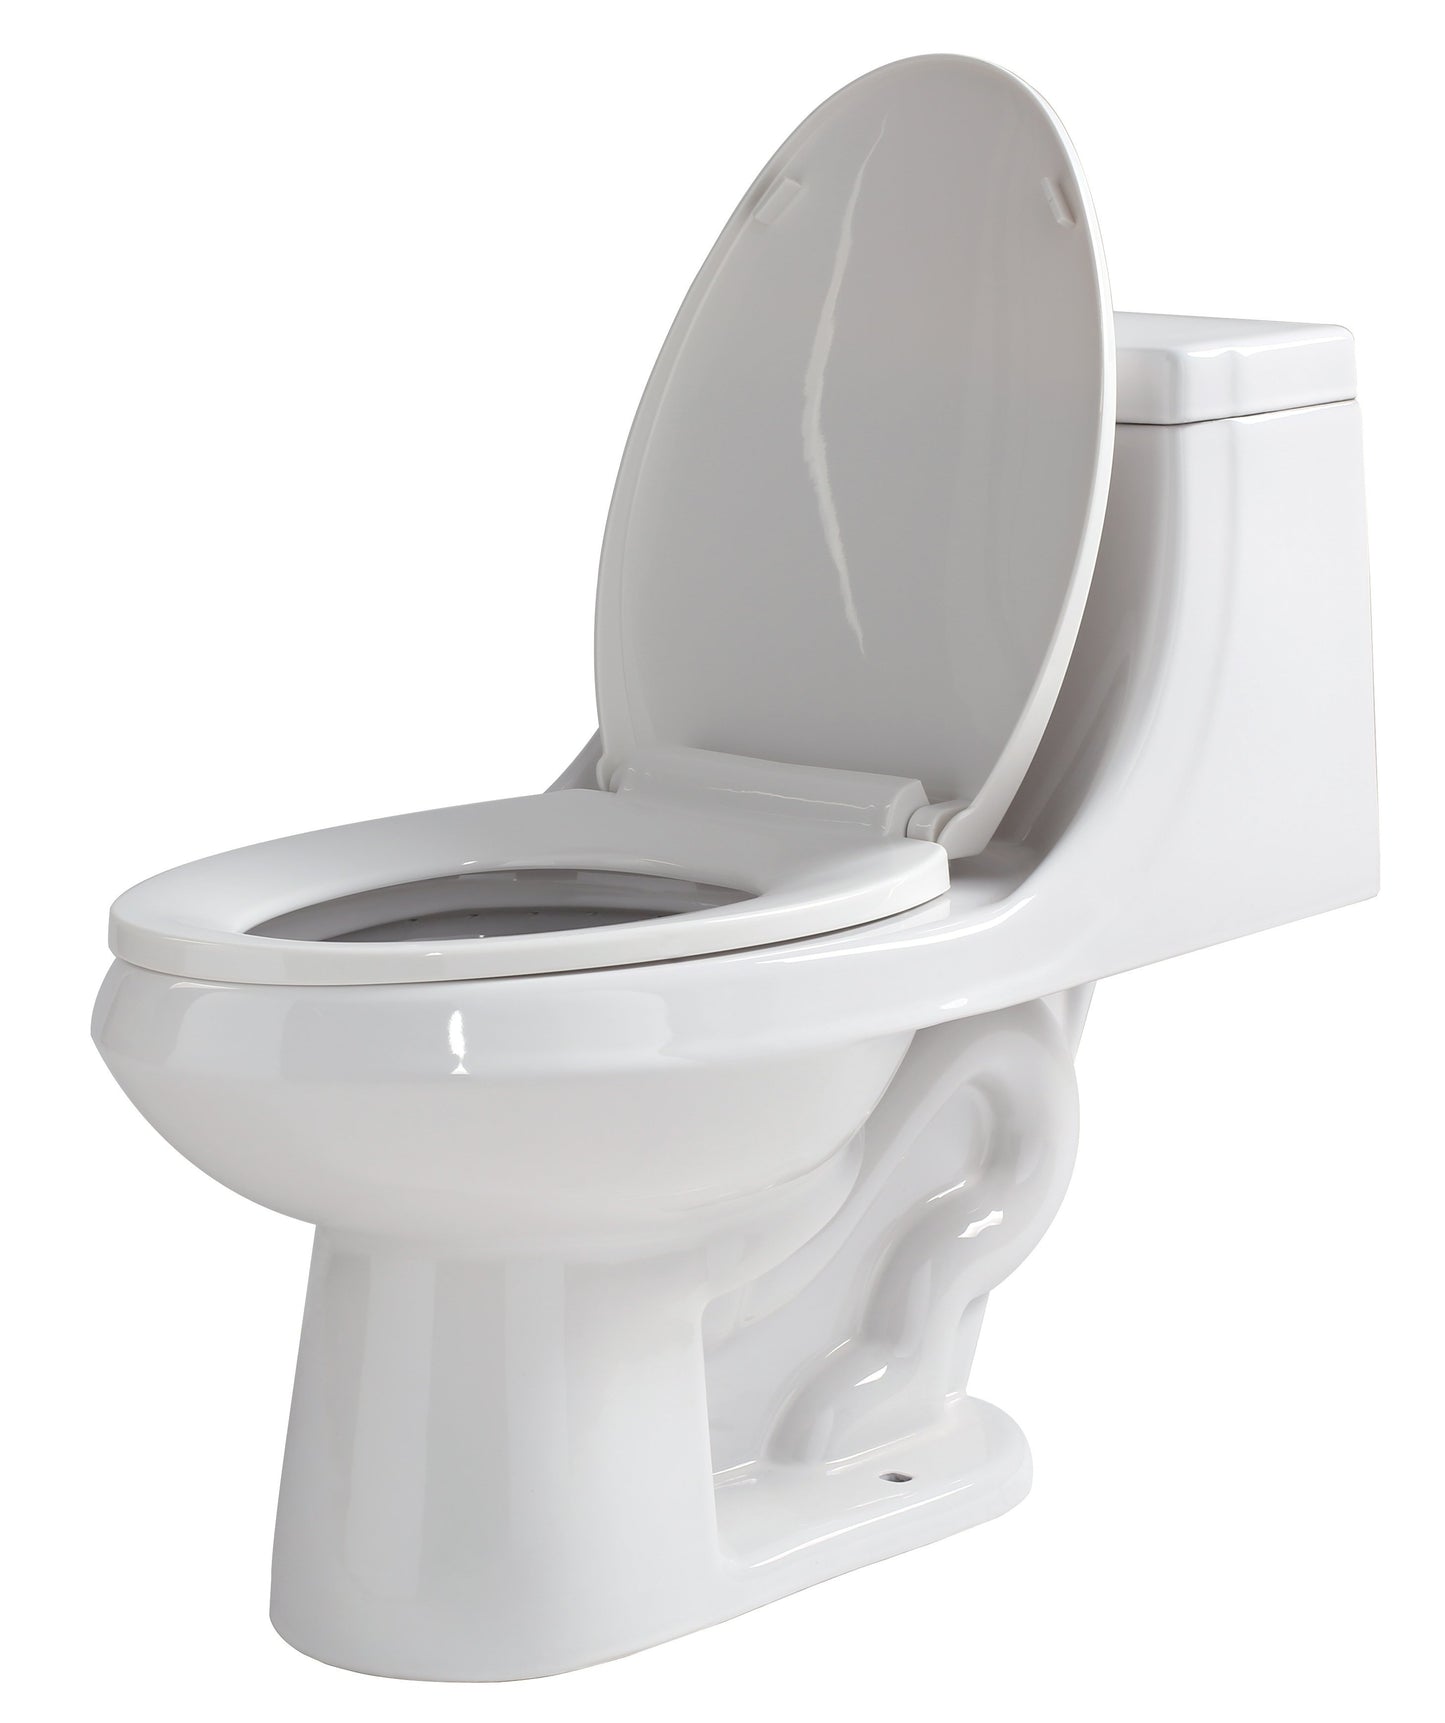 Odin 1-piece 1.28 GPF Dual Flush Elongated Toilet in White - Luxe Bathroom Vanities